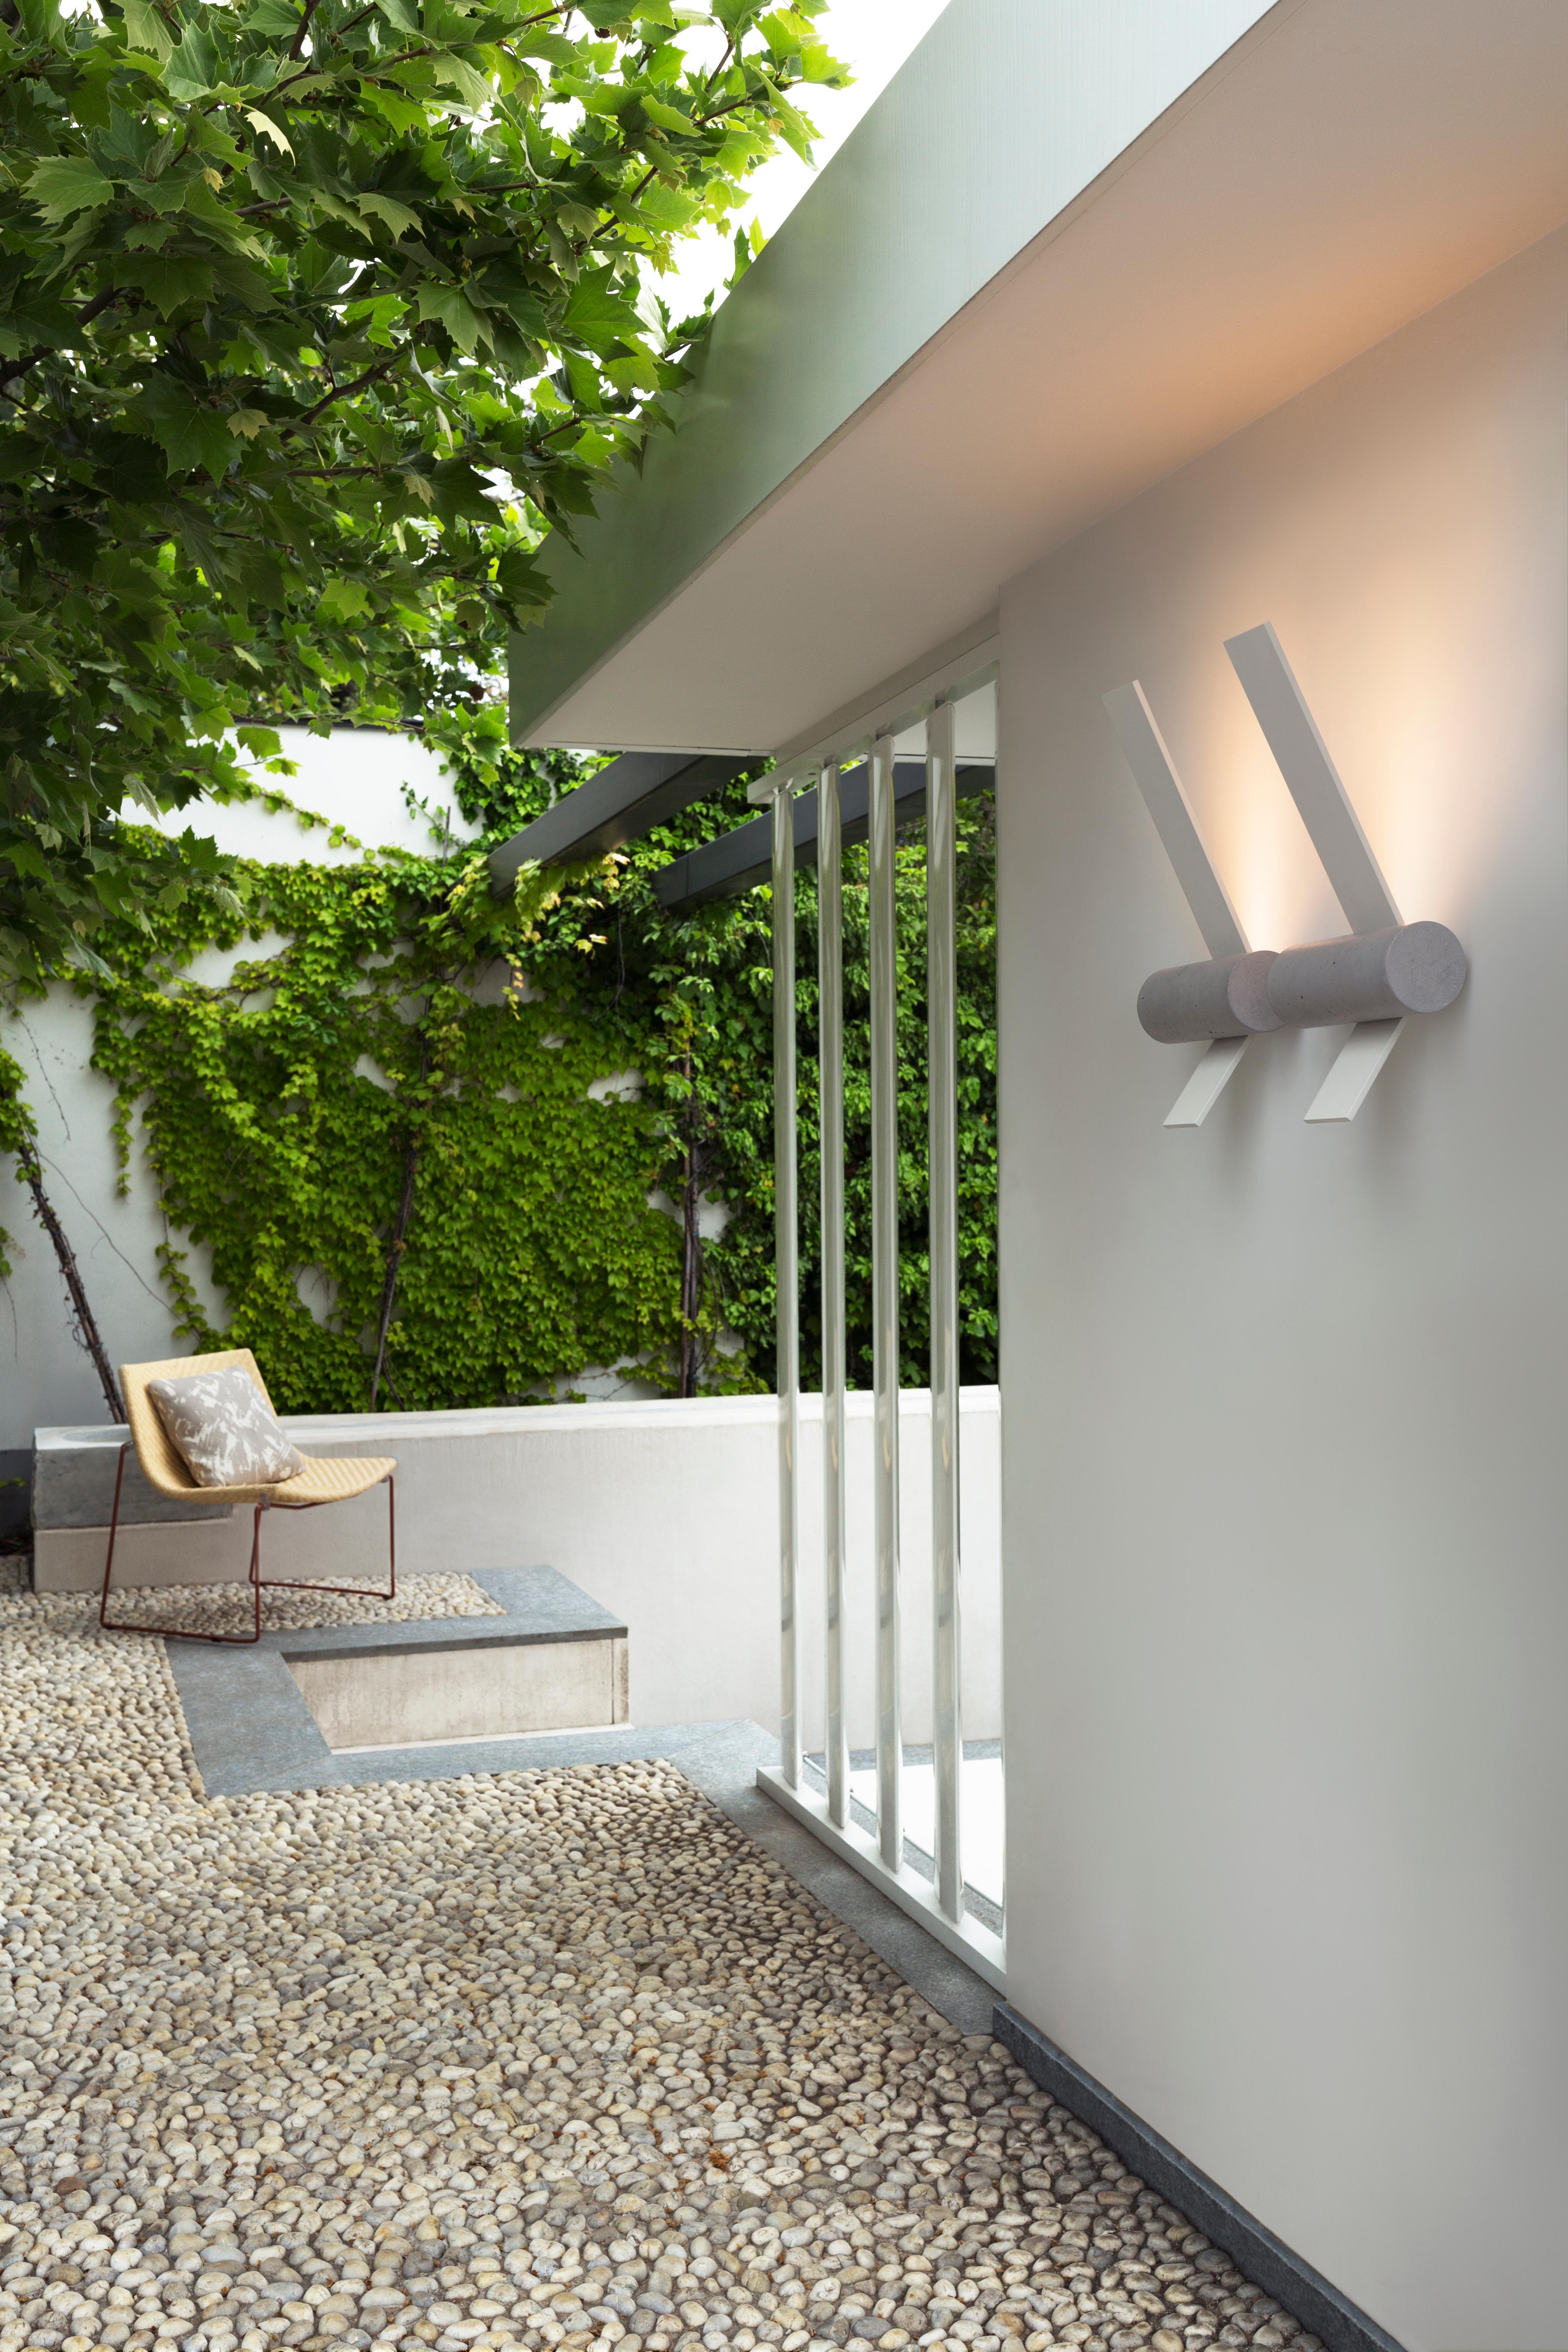 Wall Lamp Nastro 563.47 by TOOY
Designer: Studiopepe

Model shown: Eggshell hardware + Greenish-grey cylinder
Dimensions: H. 130 x W. 193 x D. 25 cm
Source light: 1 x LED 220/240V Compliant with US electric system

LED 13W 2700K


The Nastro wall